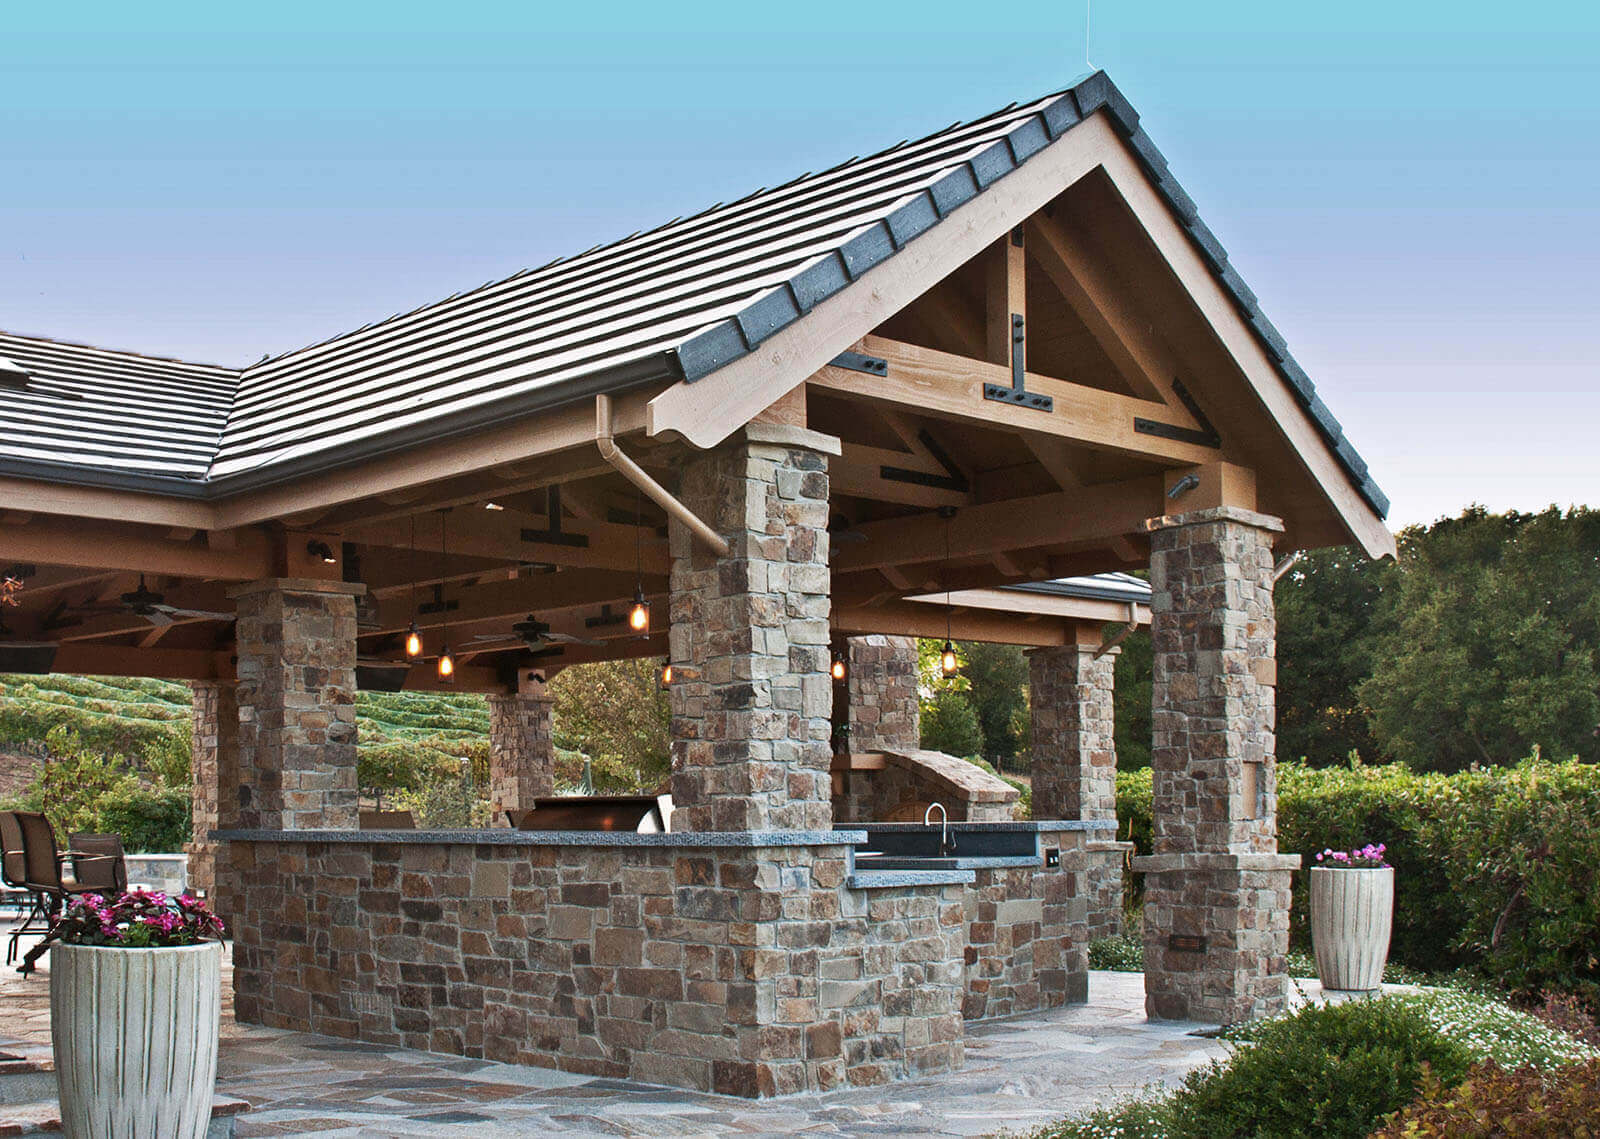 Shingled pergola with stone posts and wood rafters shelters outdoor living area, bar and fireplace with view of California hills